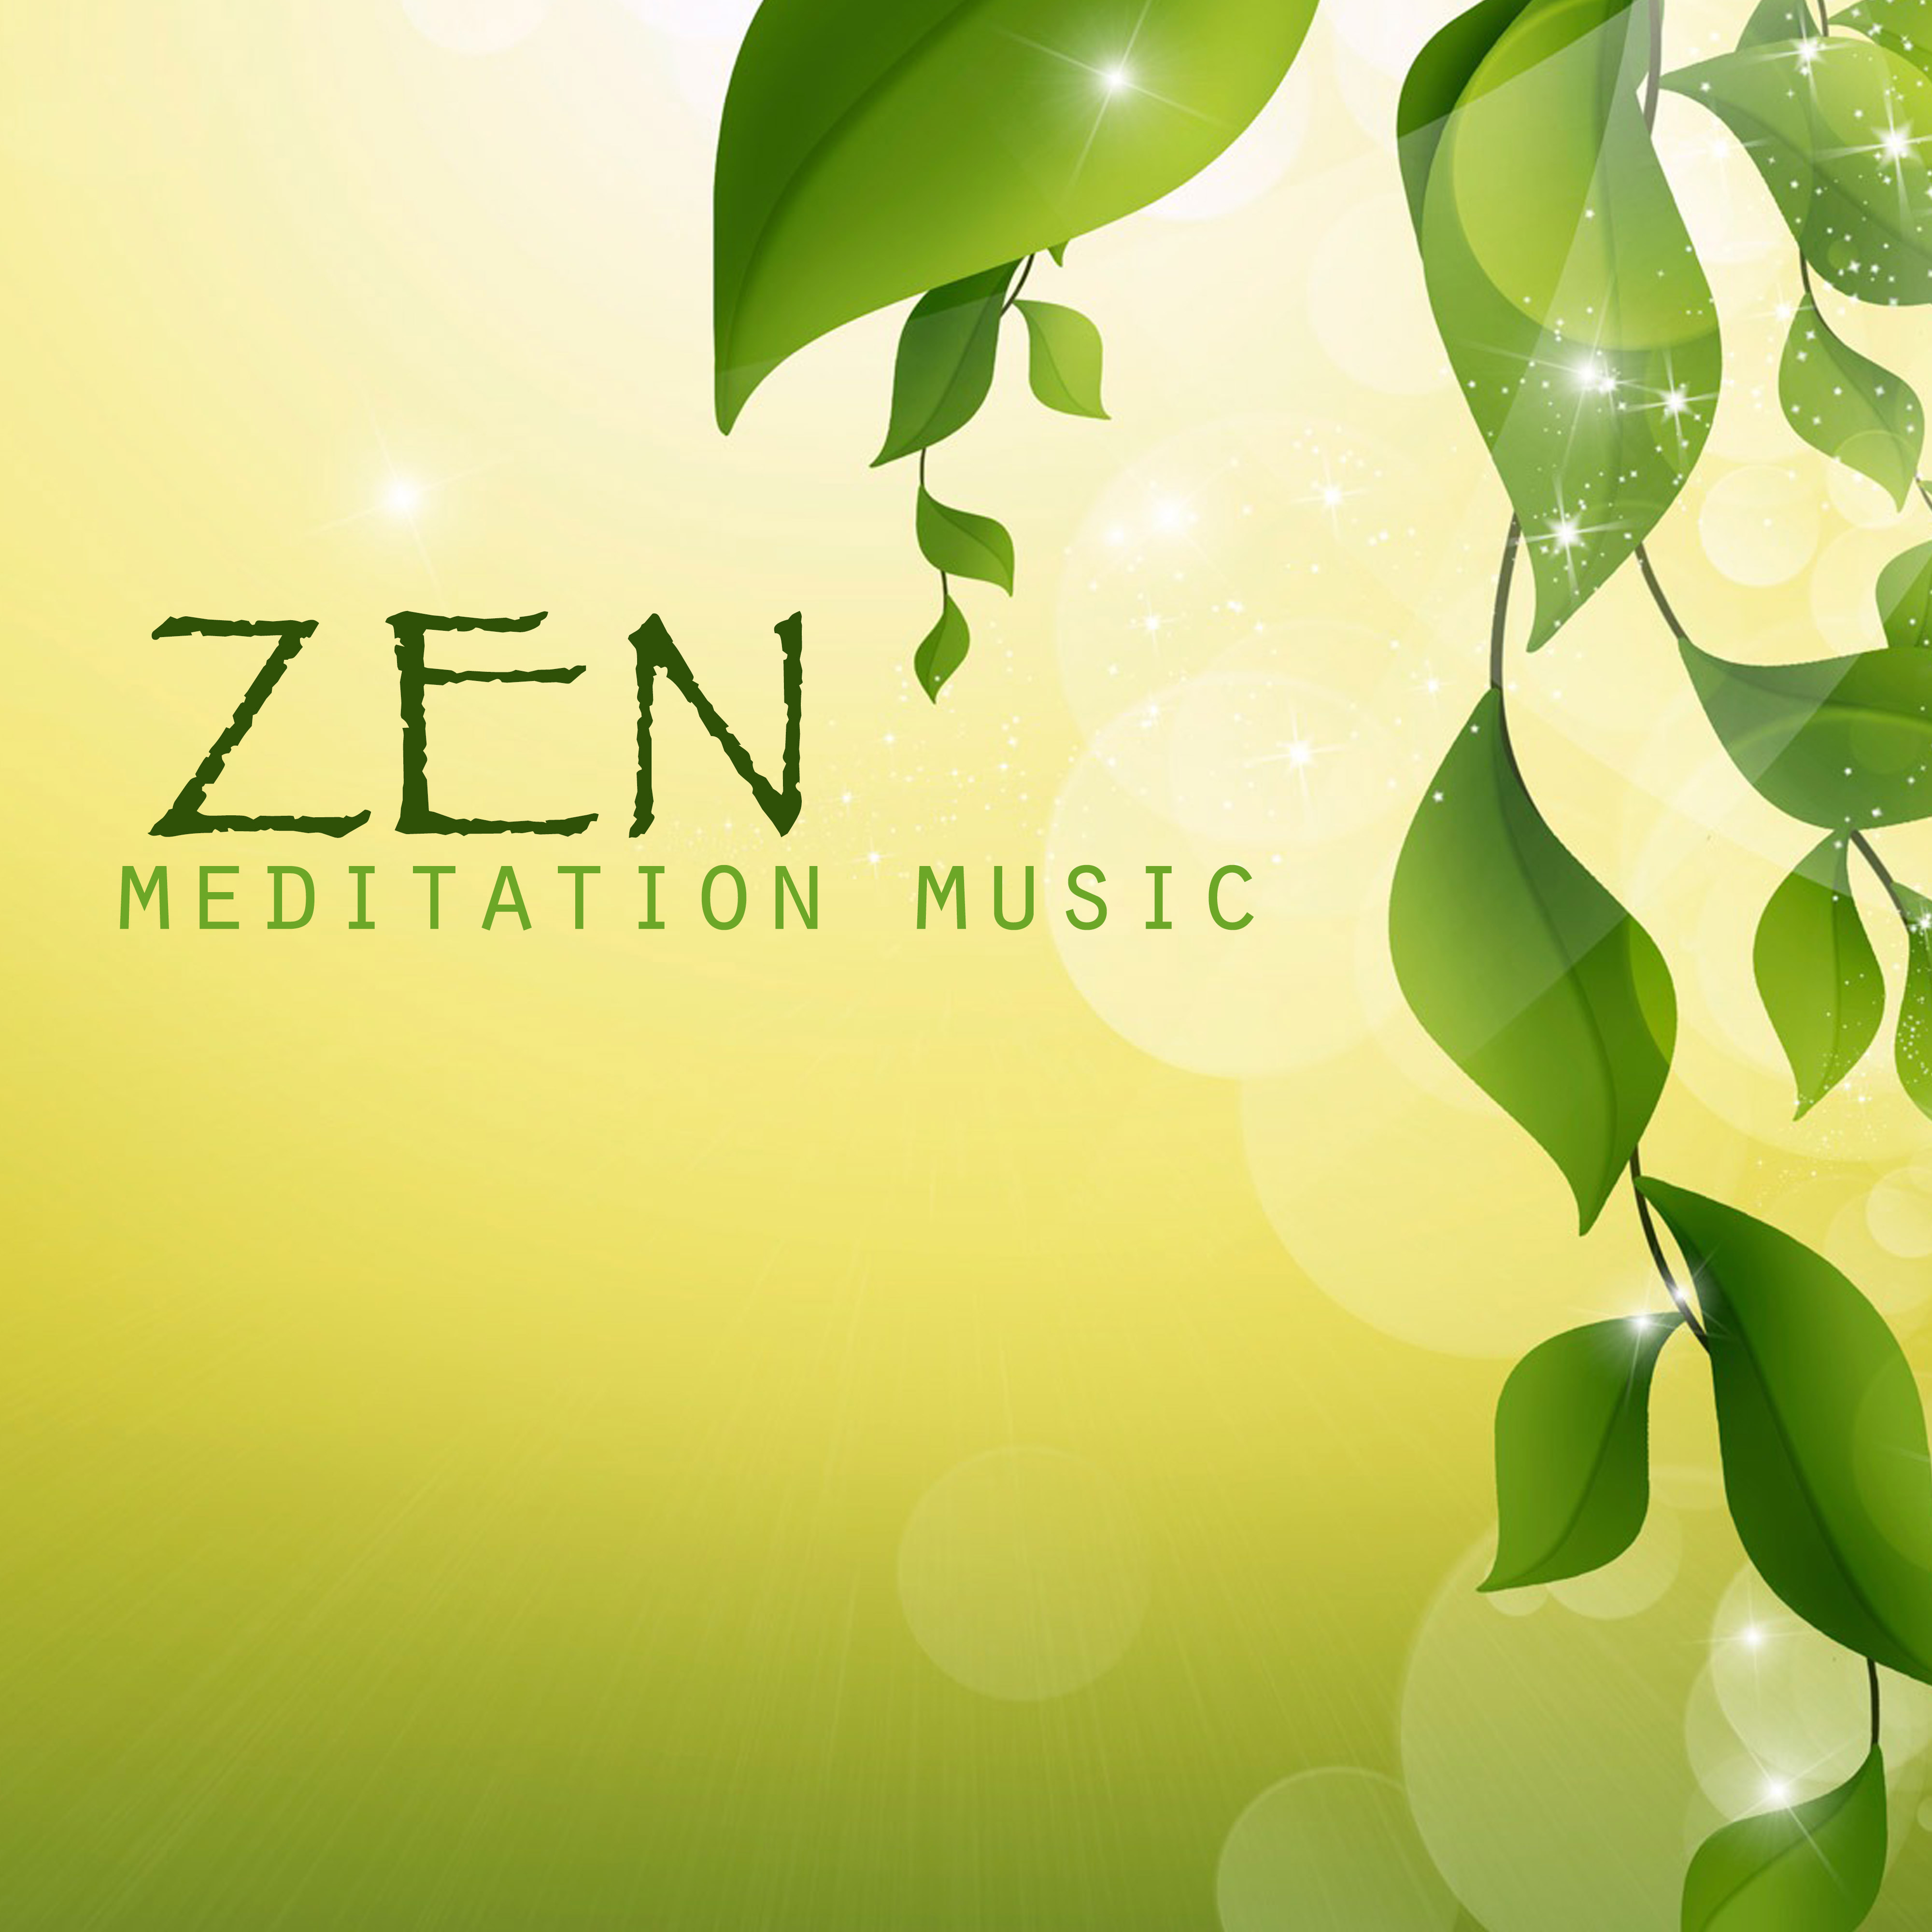 Buddhist Music for Relax and Healing Senses